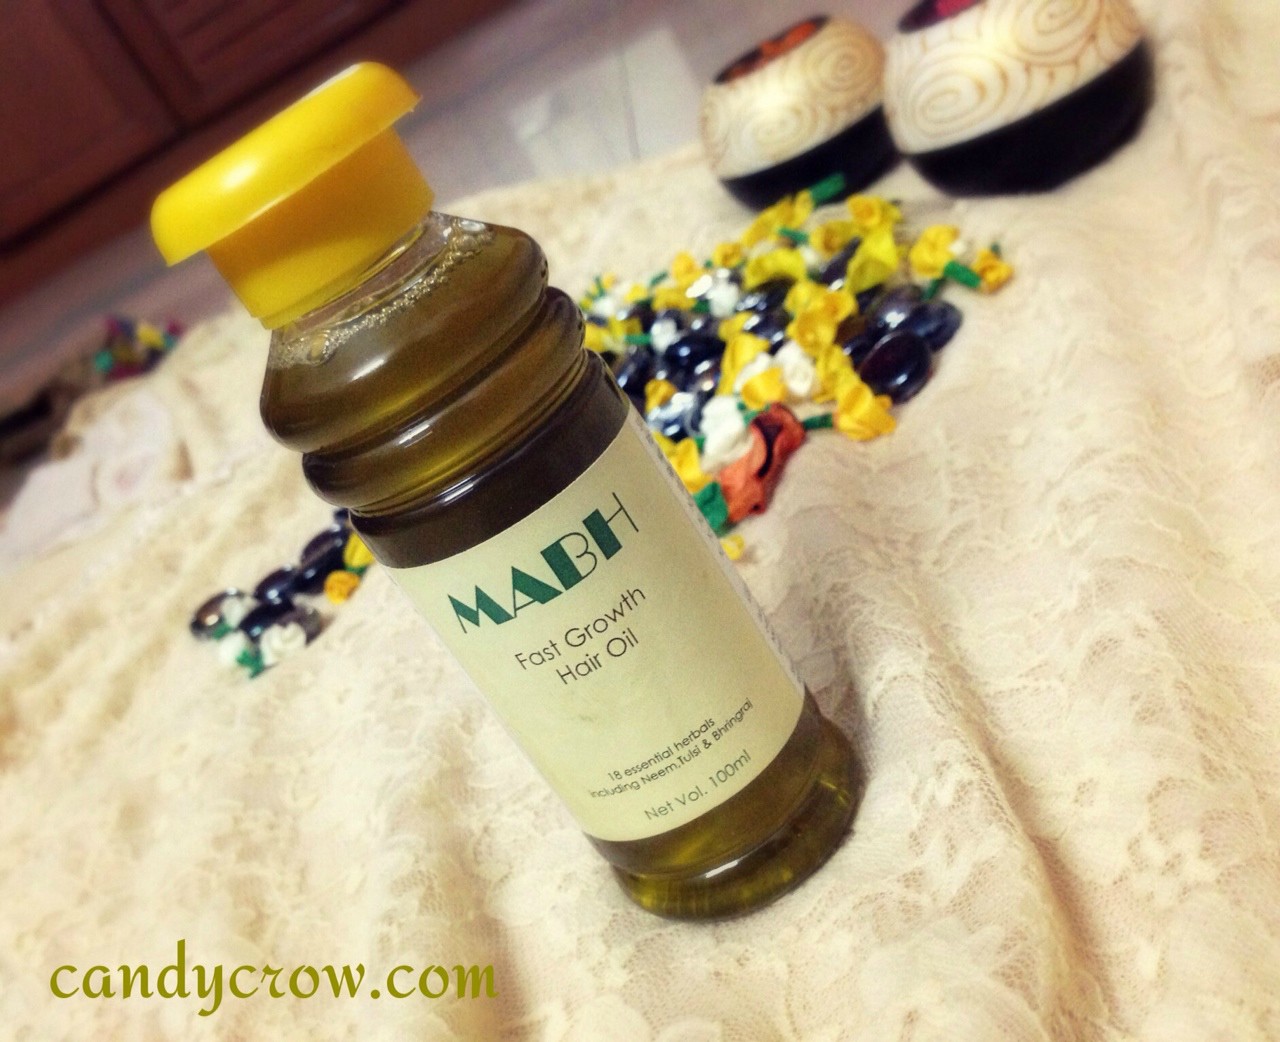 MABH Fast Hair Growth Oil Review - Candy Crow